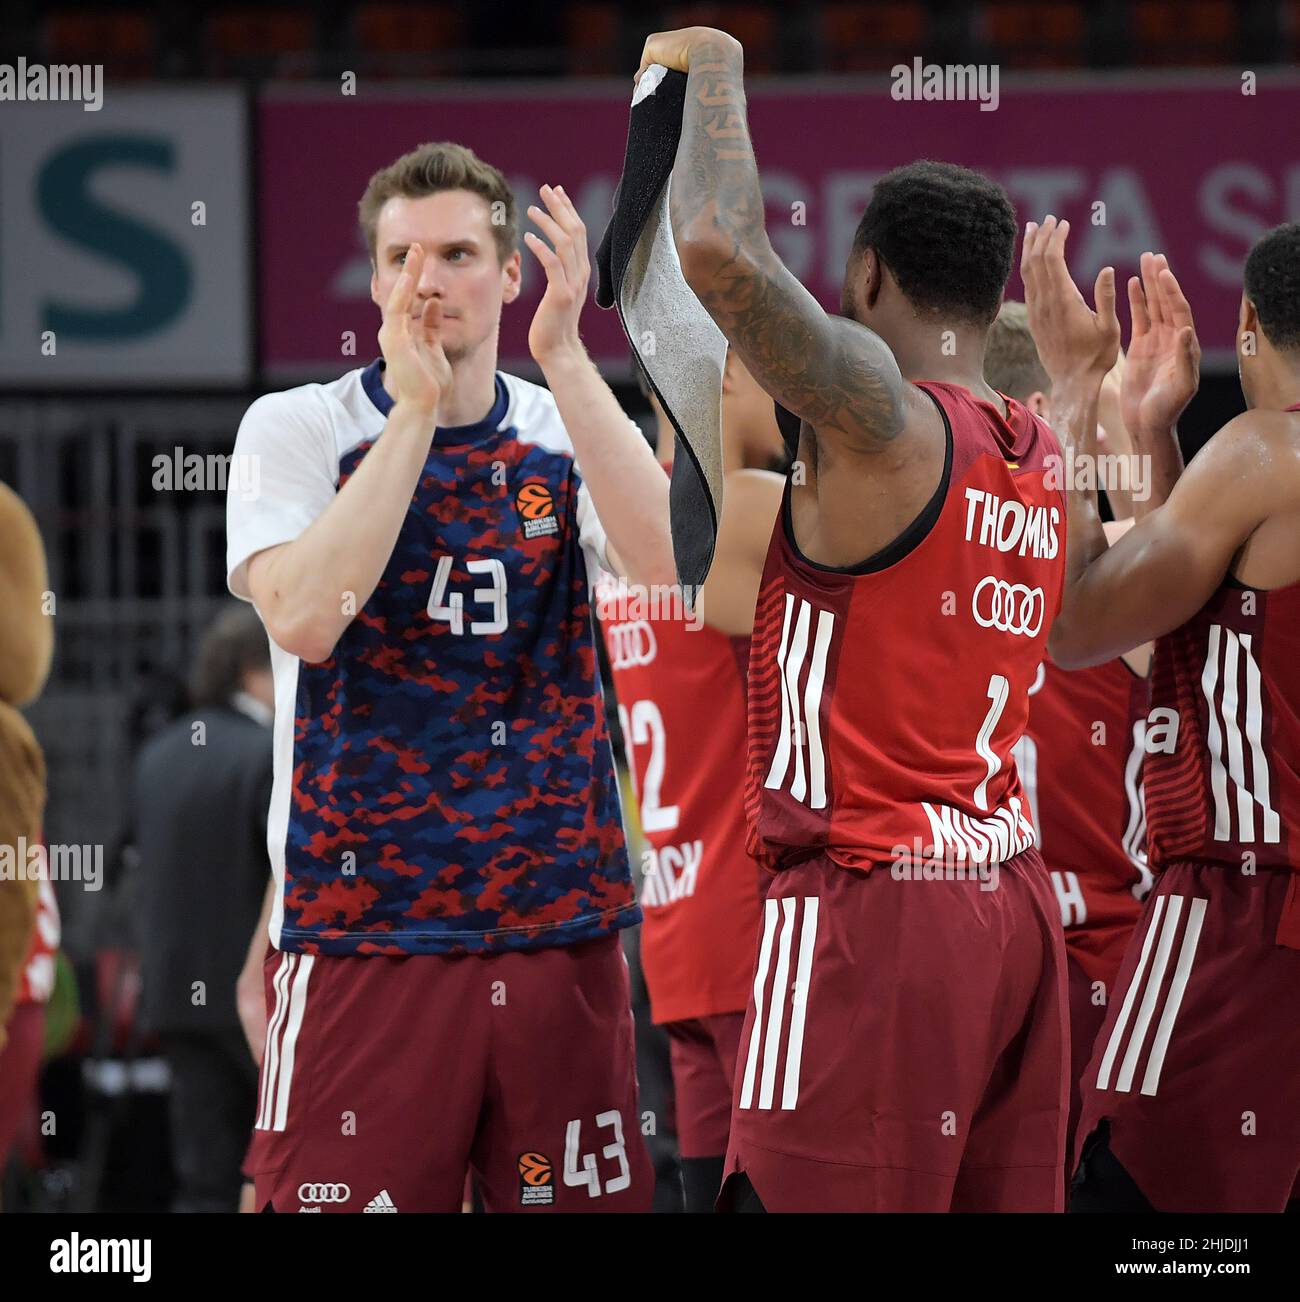 Muenchen, Germany (DE), 28 January, 2022. Pictured left to right, Mannschaft, Spieler, jubeln nach Spielende, celebrate at the end of the match at the Basketball Euroleague, FC Bayern Muenchen - Alba Berlin. Credit: Eduard Martin/Alamy Live News Stock Photo